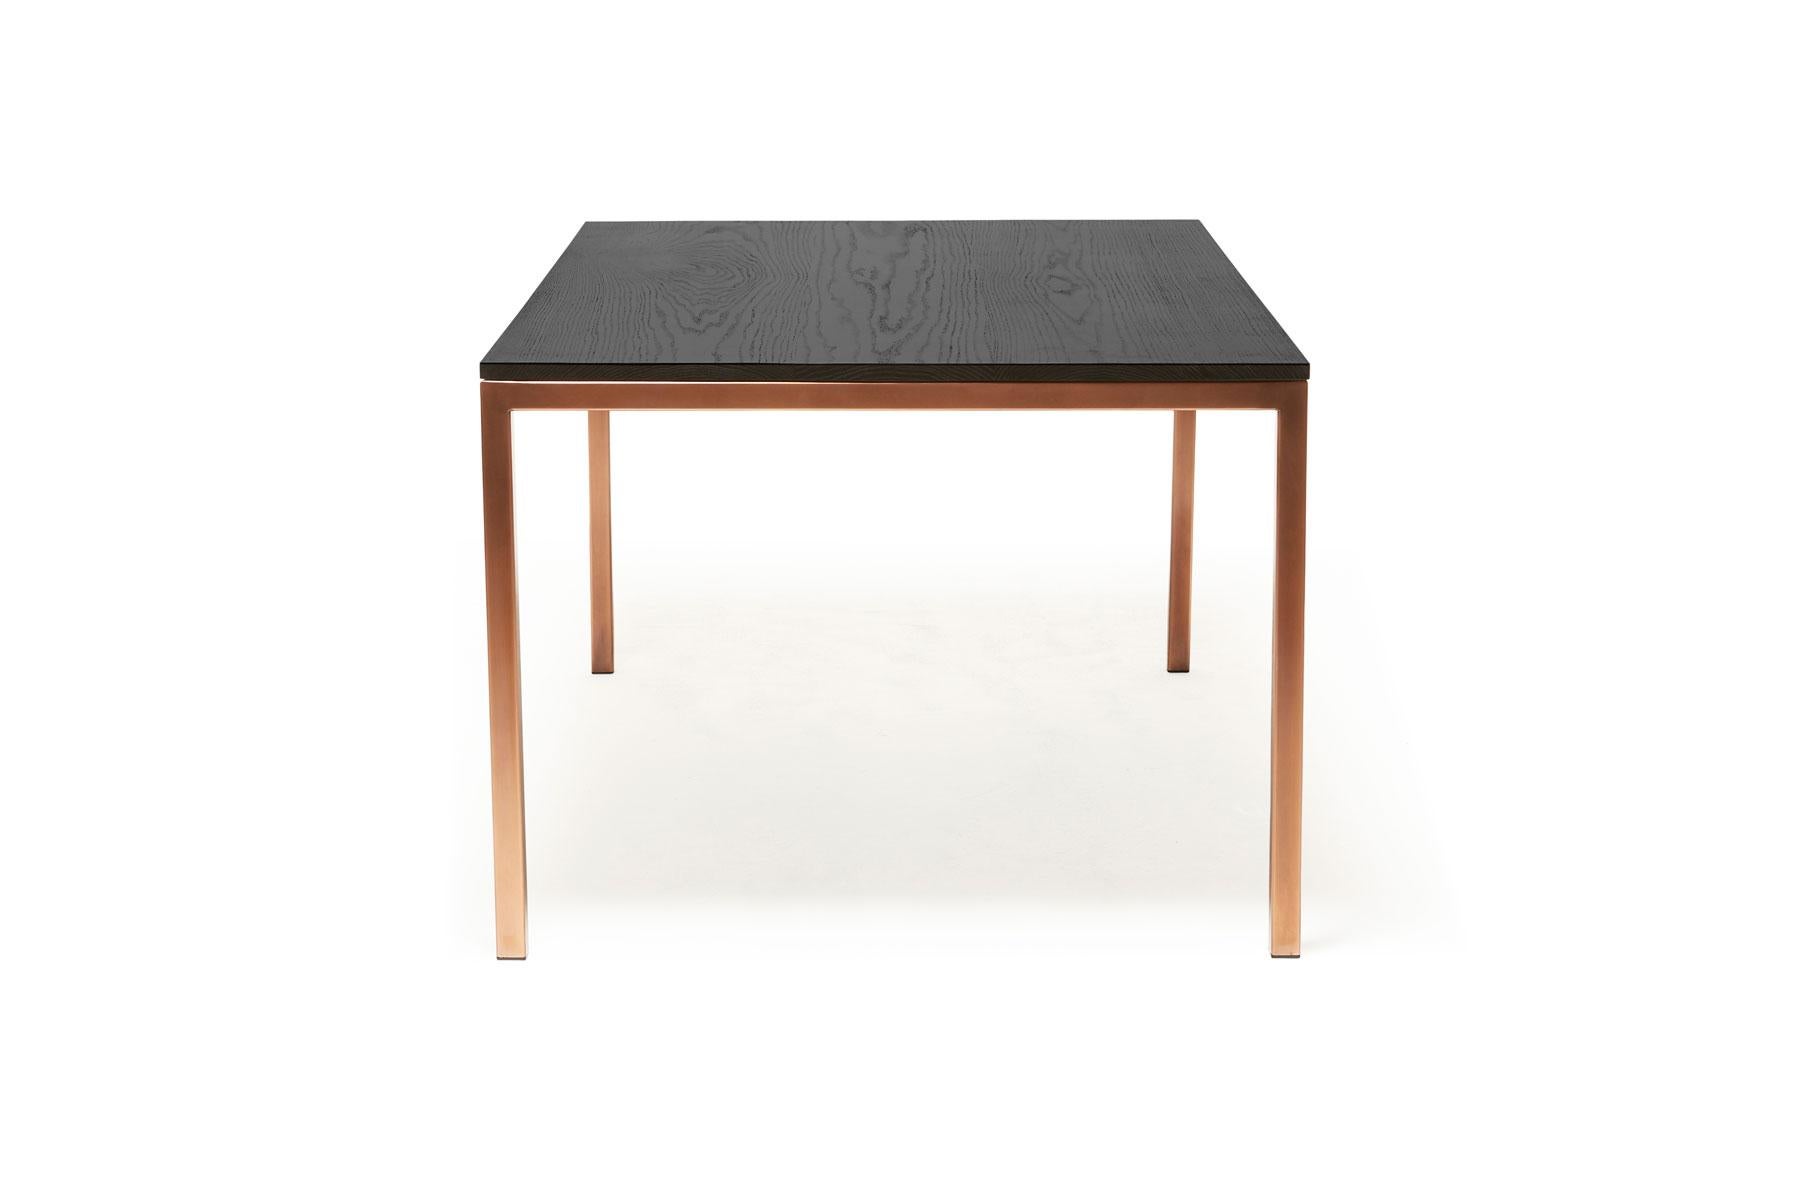 Metalwork Ebonized Oak and Antique Copper Small Dining Table For Sale